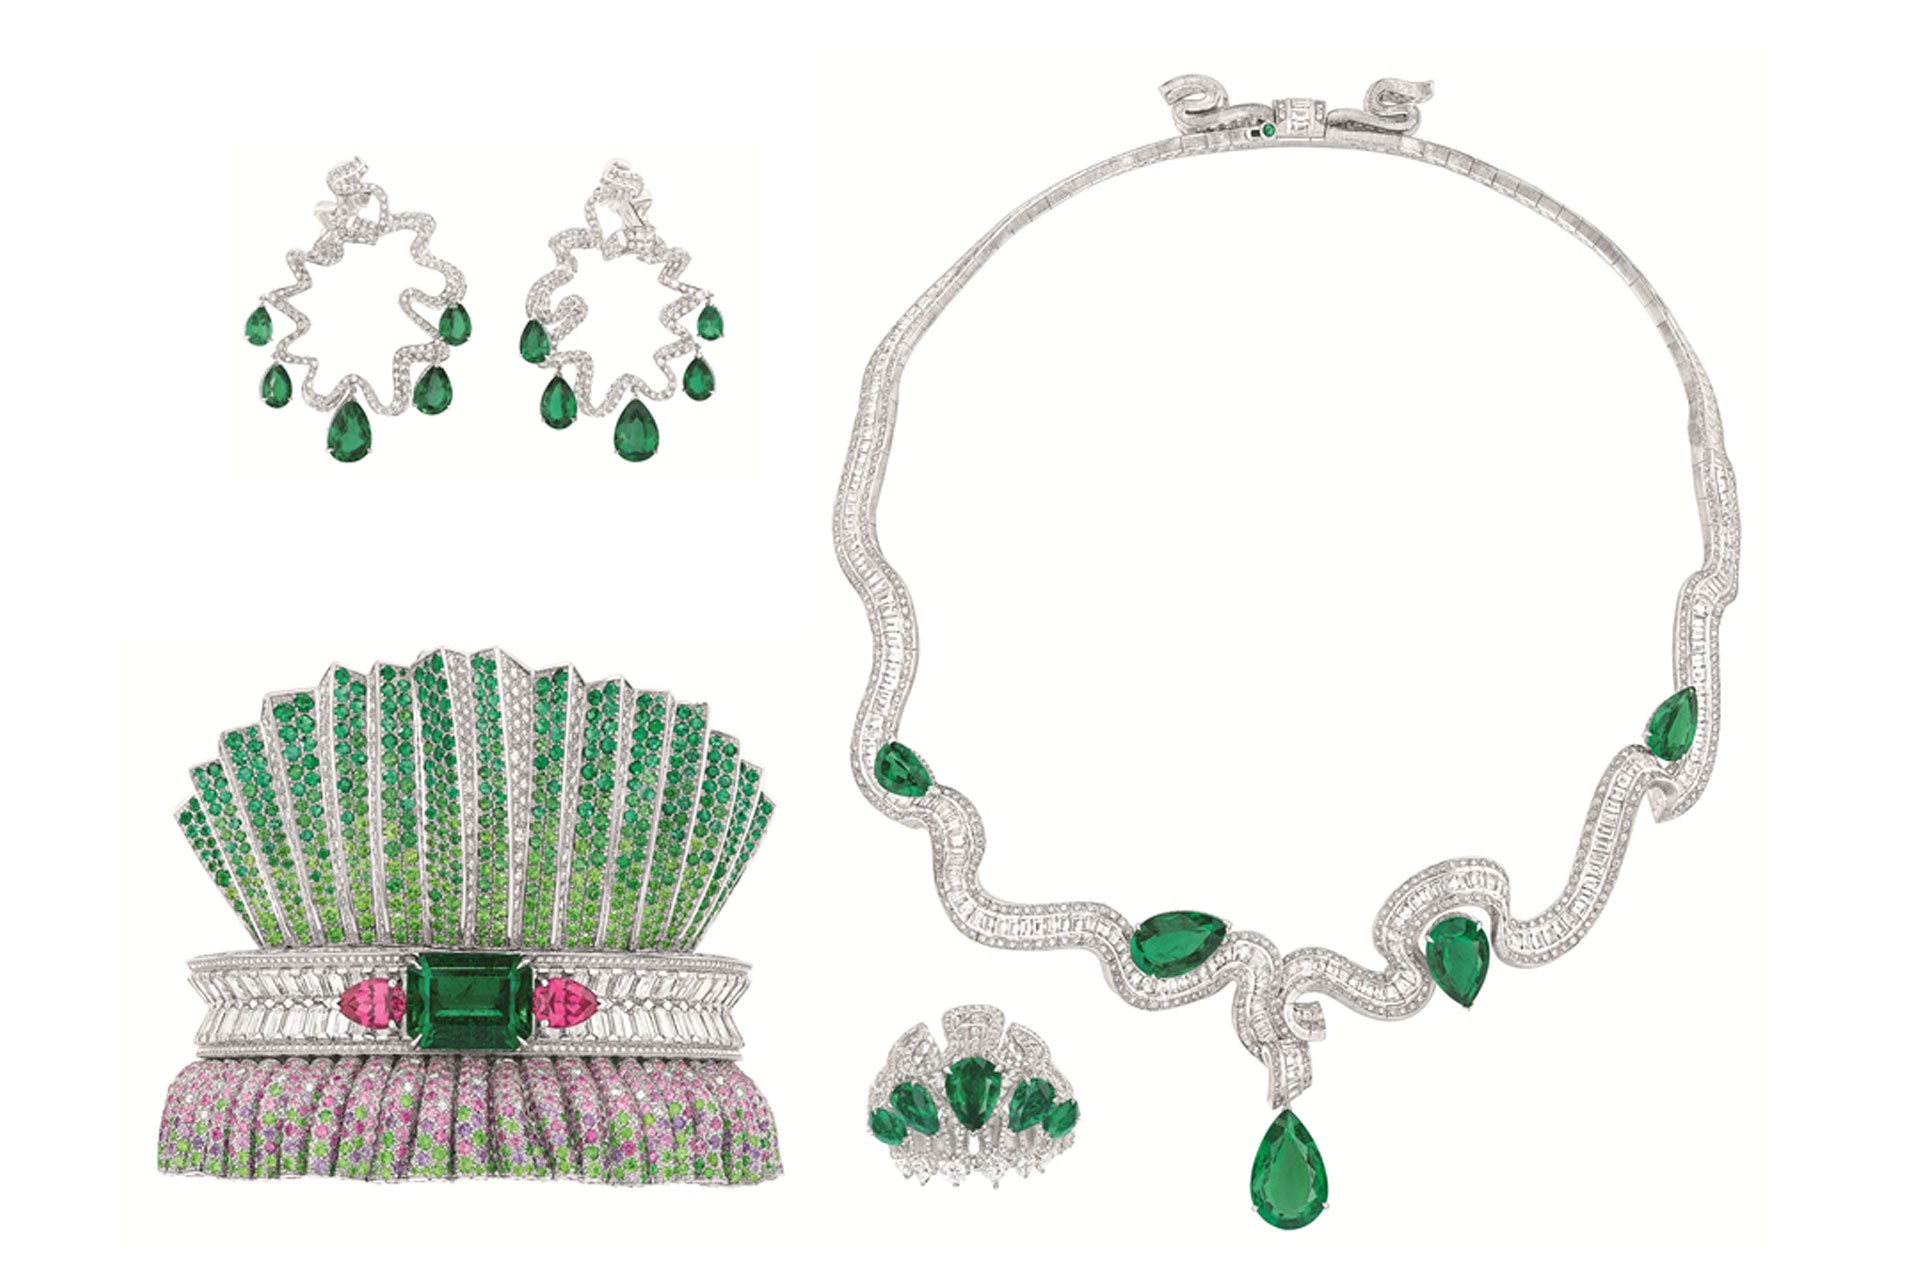 A matching set of emeralds and diamonds with a bangle made of white gold, diamonds, sapphires, emeralds, demantoid garnets and orangy-pink spinels, all inspired by Dior’s 1947 Bar outfit (Foto:  )